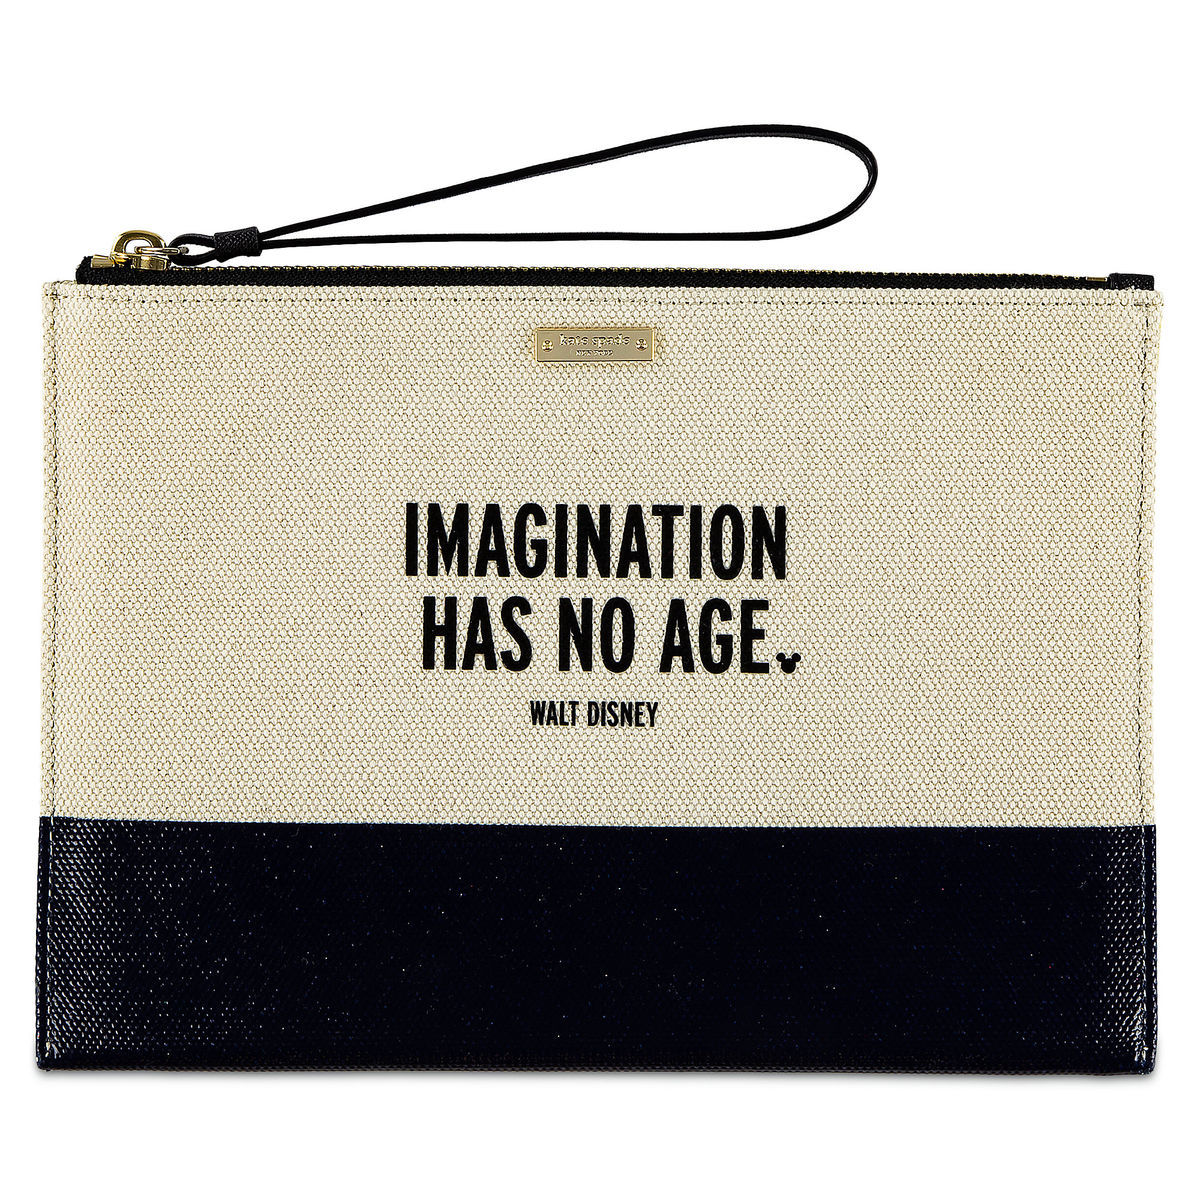 Disney Imagination Has No Age Canvas Glitter Clutch by Kate Spade New with Tag